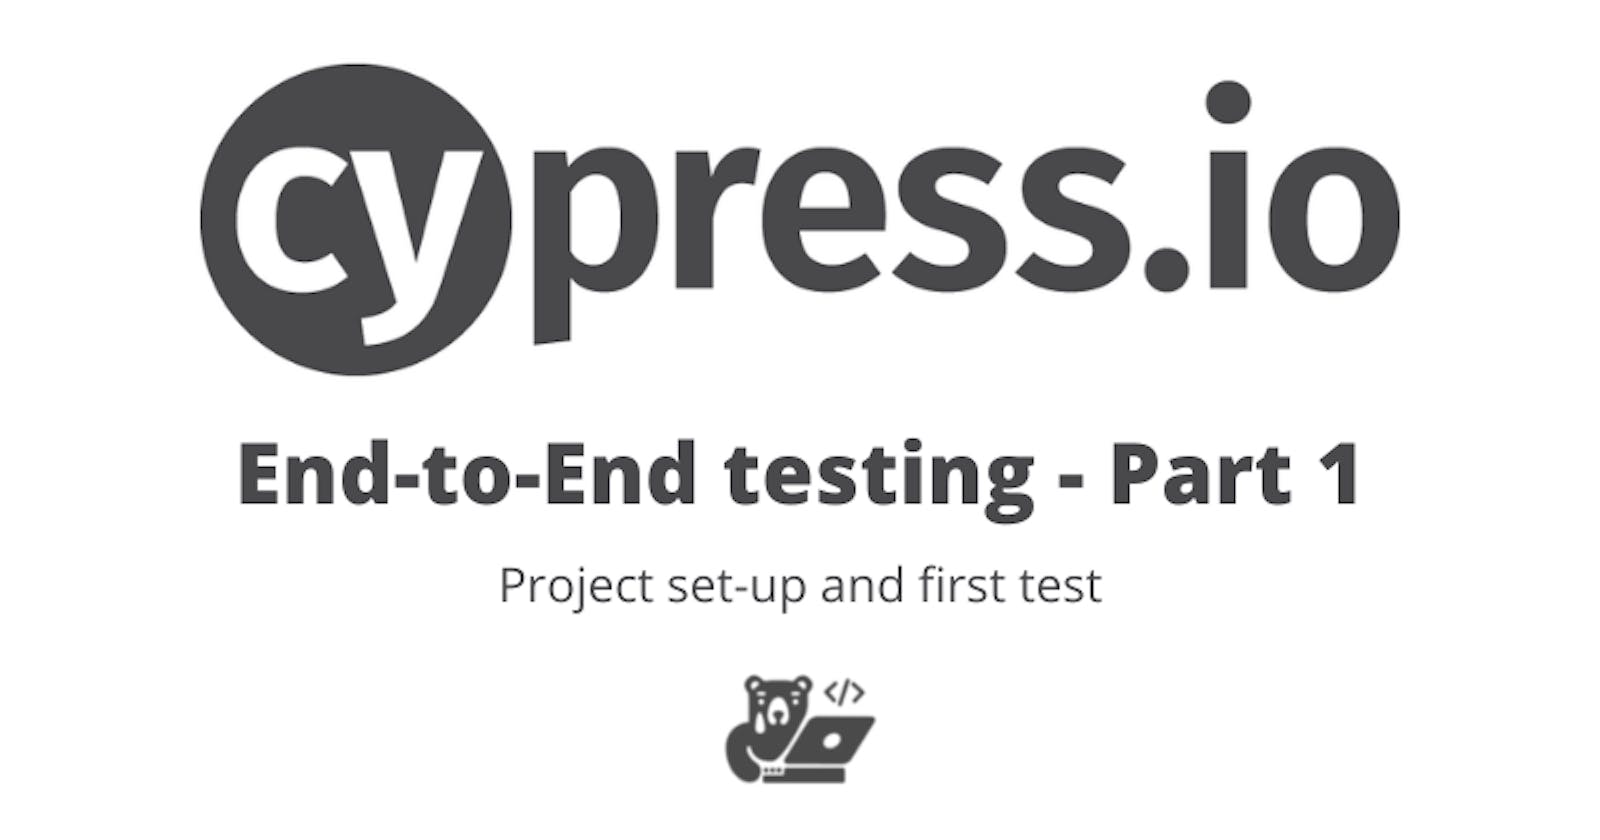 End-to-End testing with Cypress